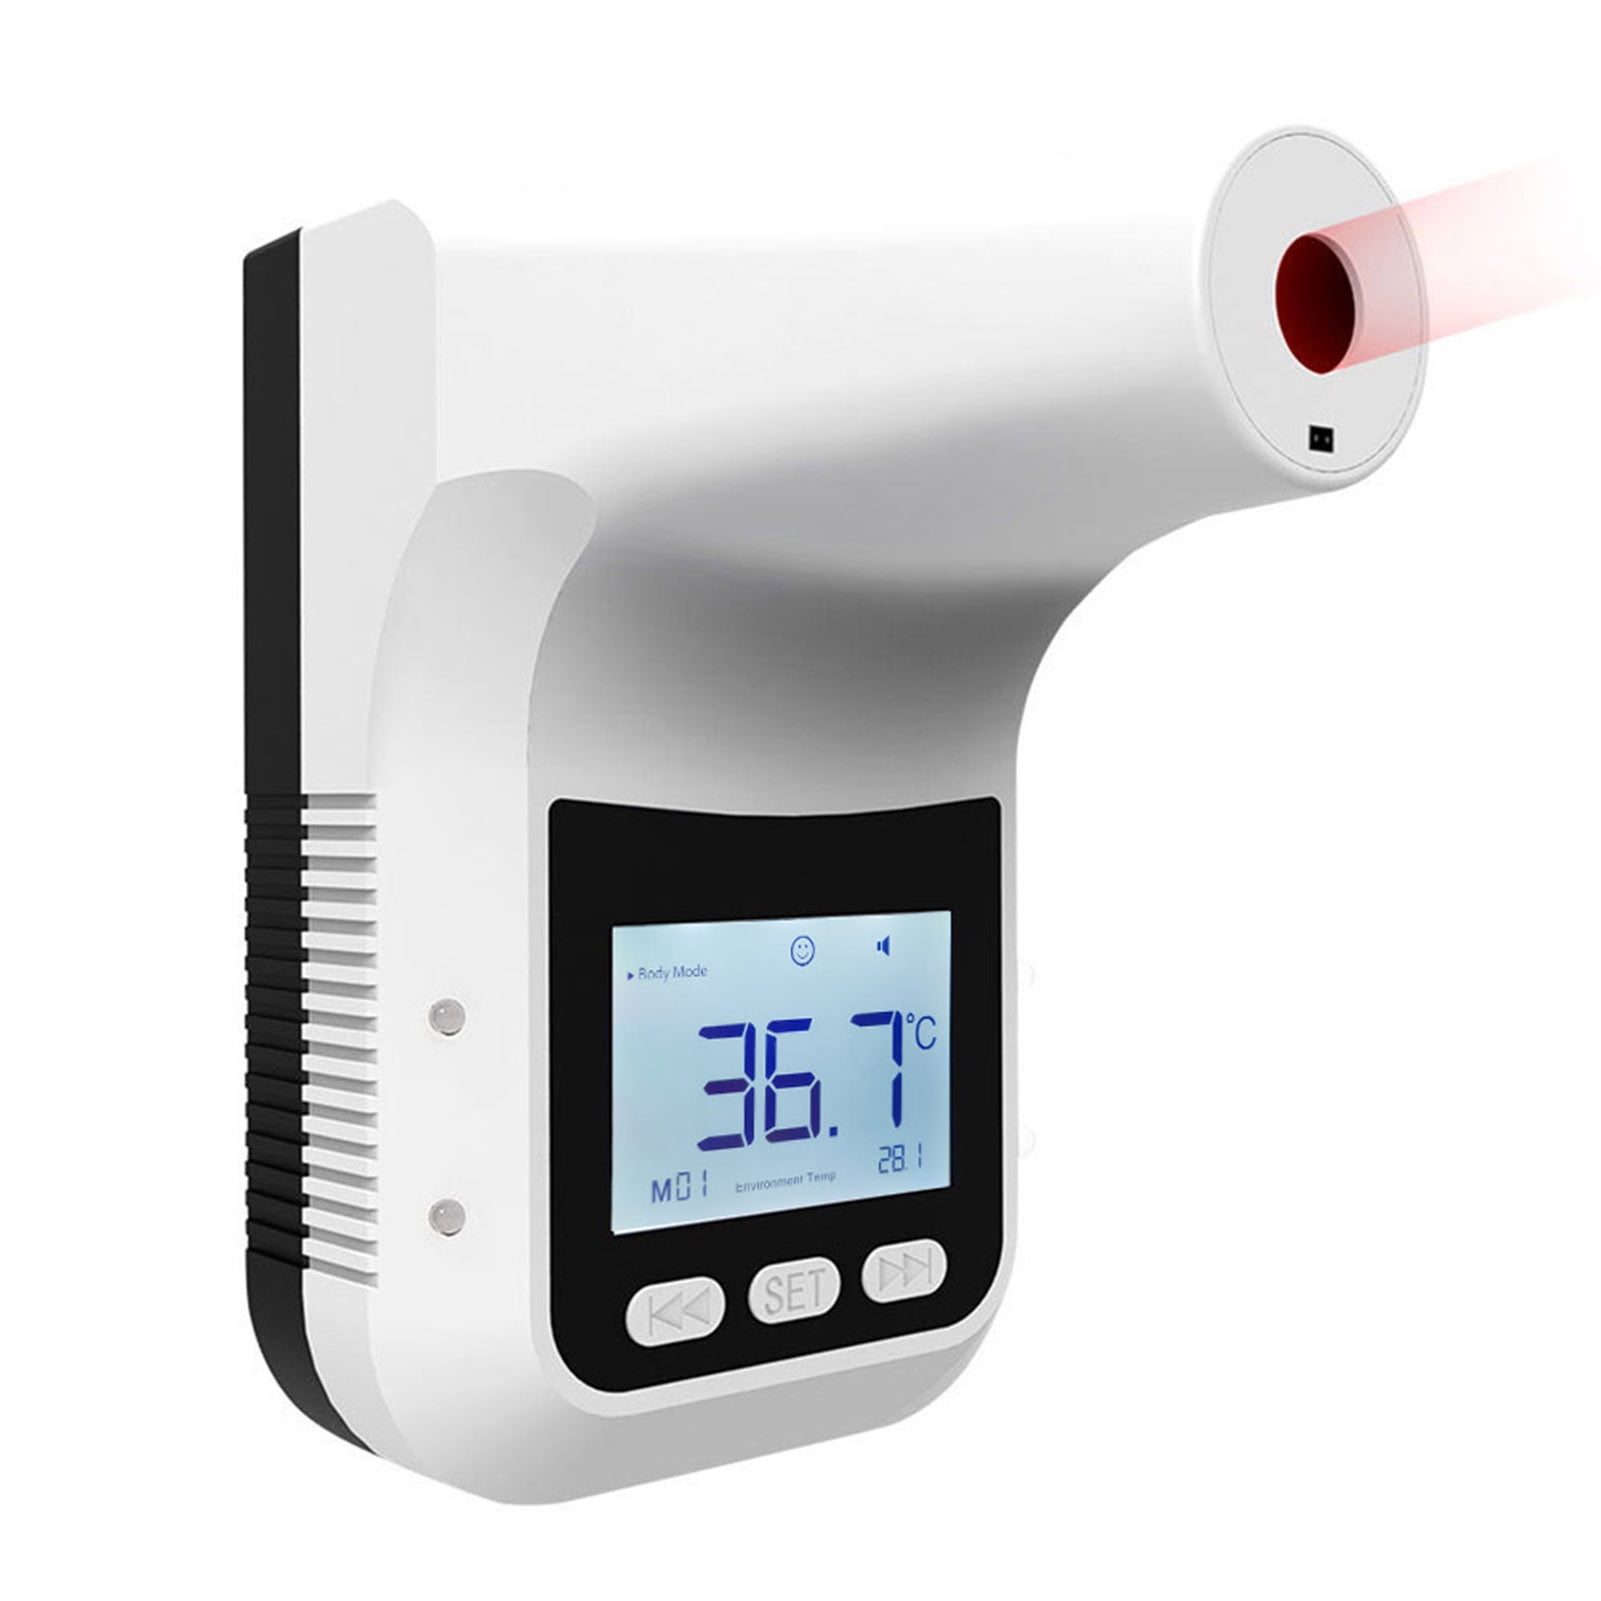 K3 Pro Sterile Thermometer Non- Automatic Infrared Thermometer Hanging Temperature 5 Languages Adjustable / USB/Power Bank/4*AA Battery 3 Installation